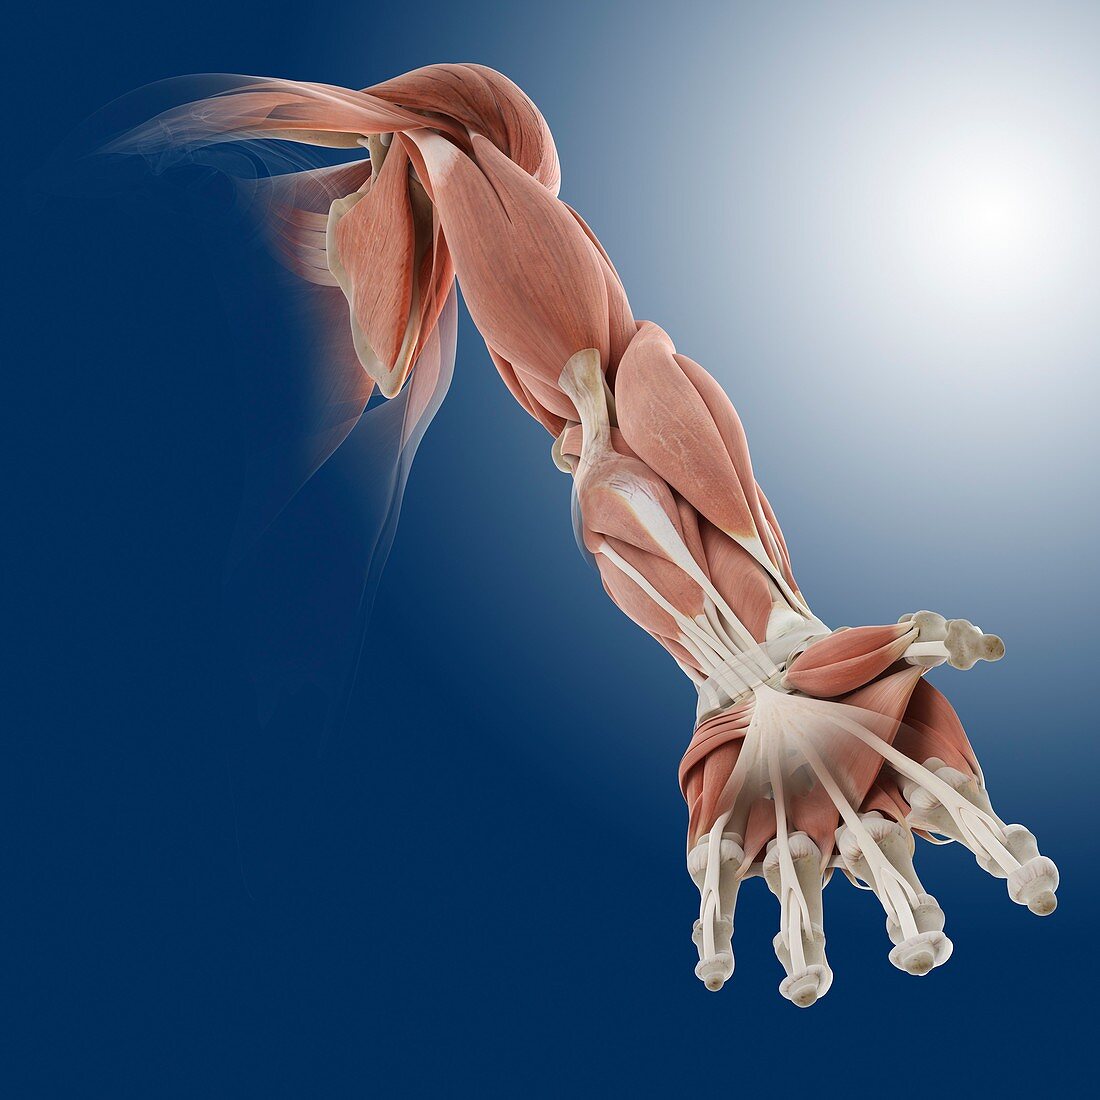 Frontal arm muscles,artwork